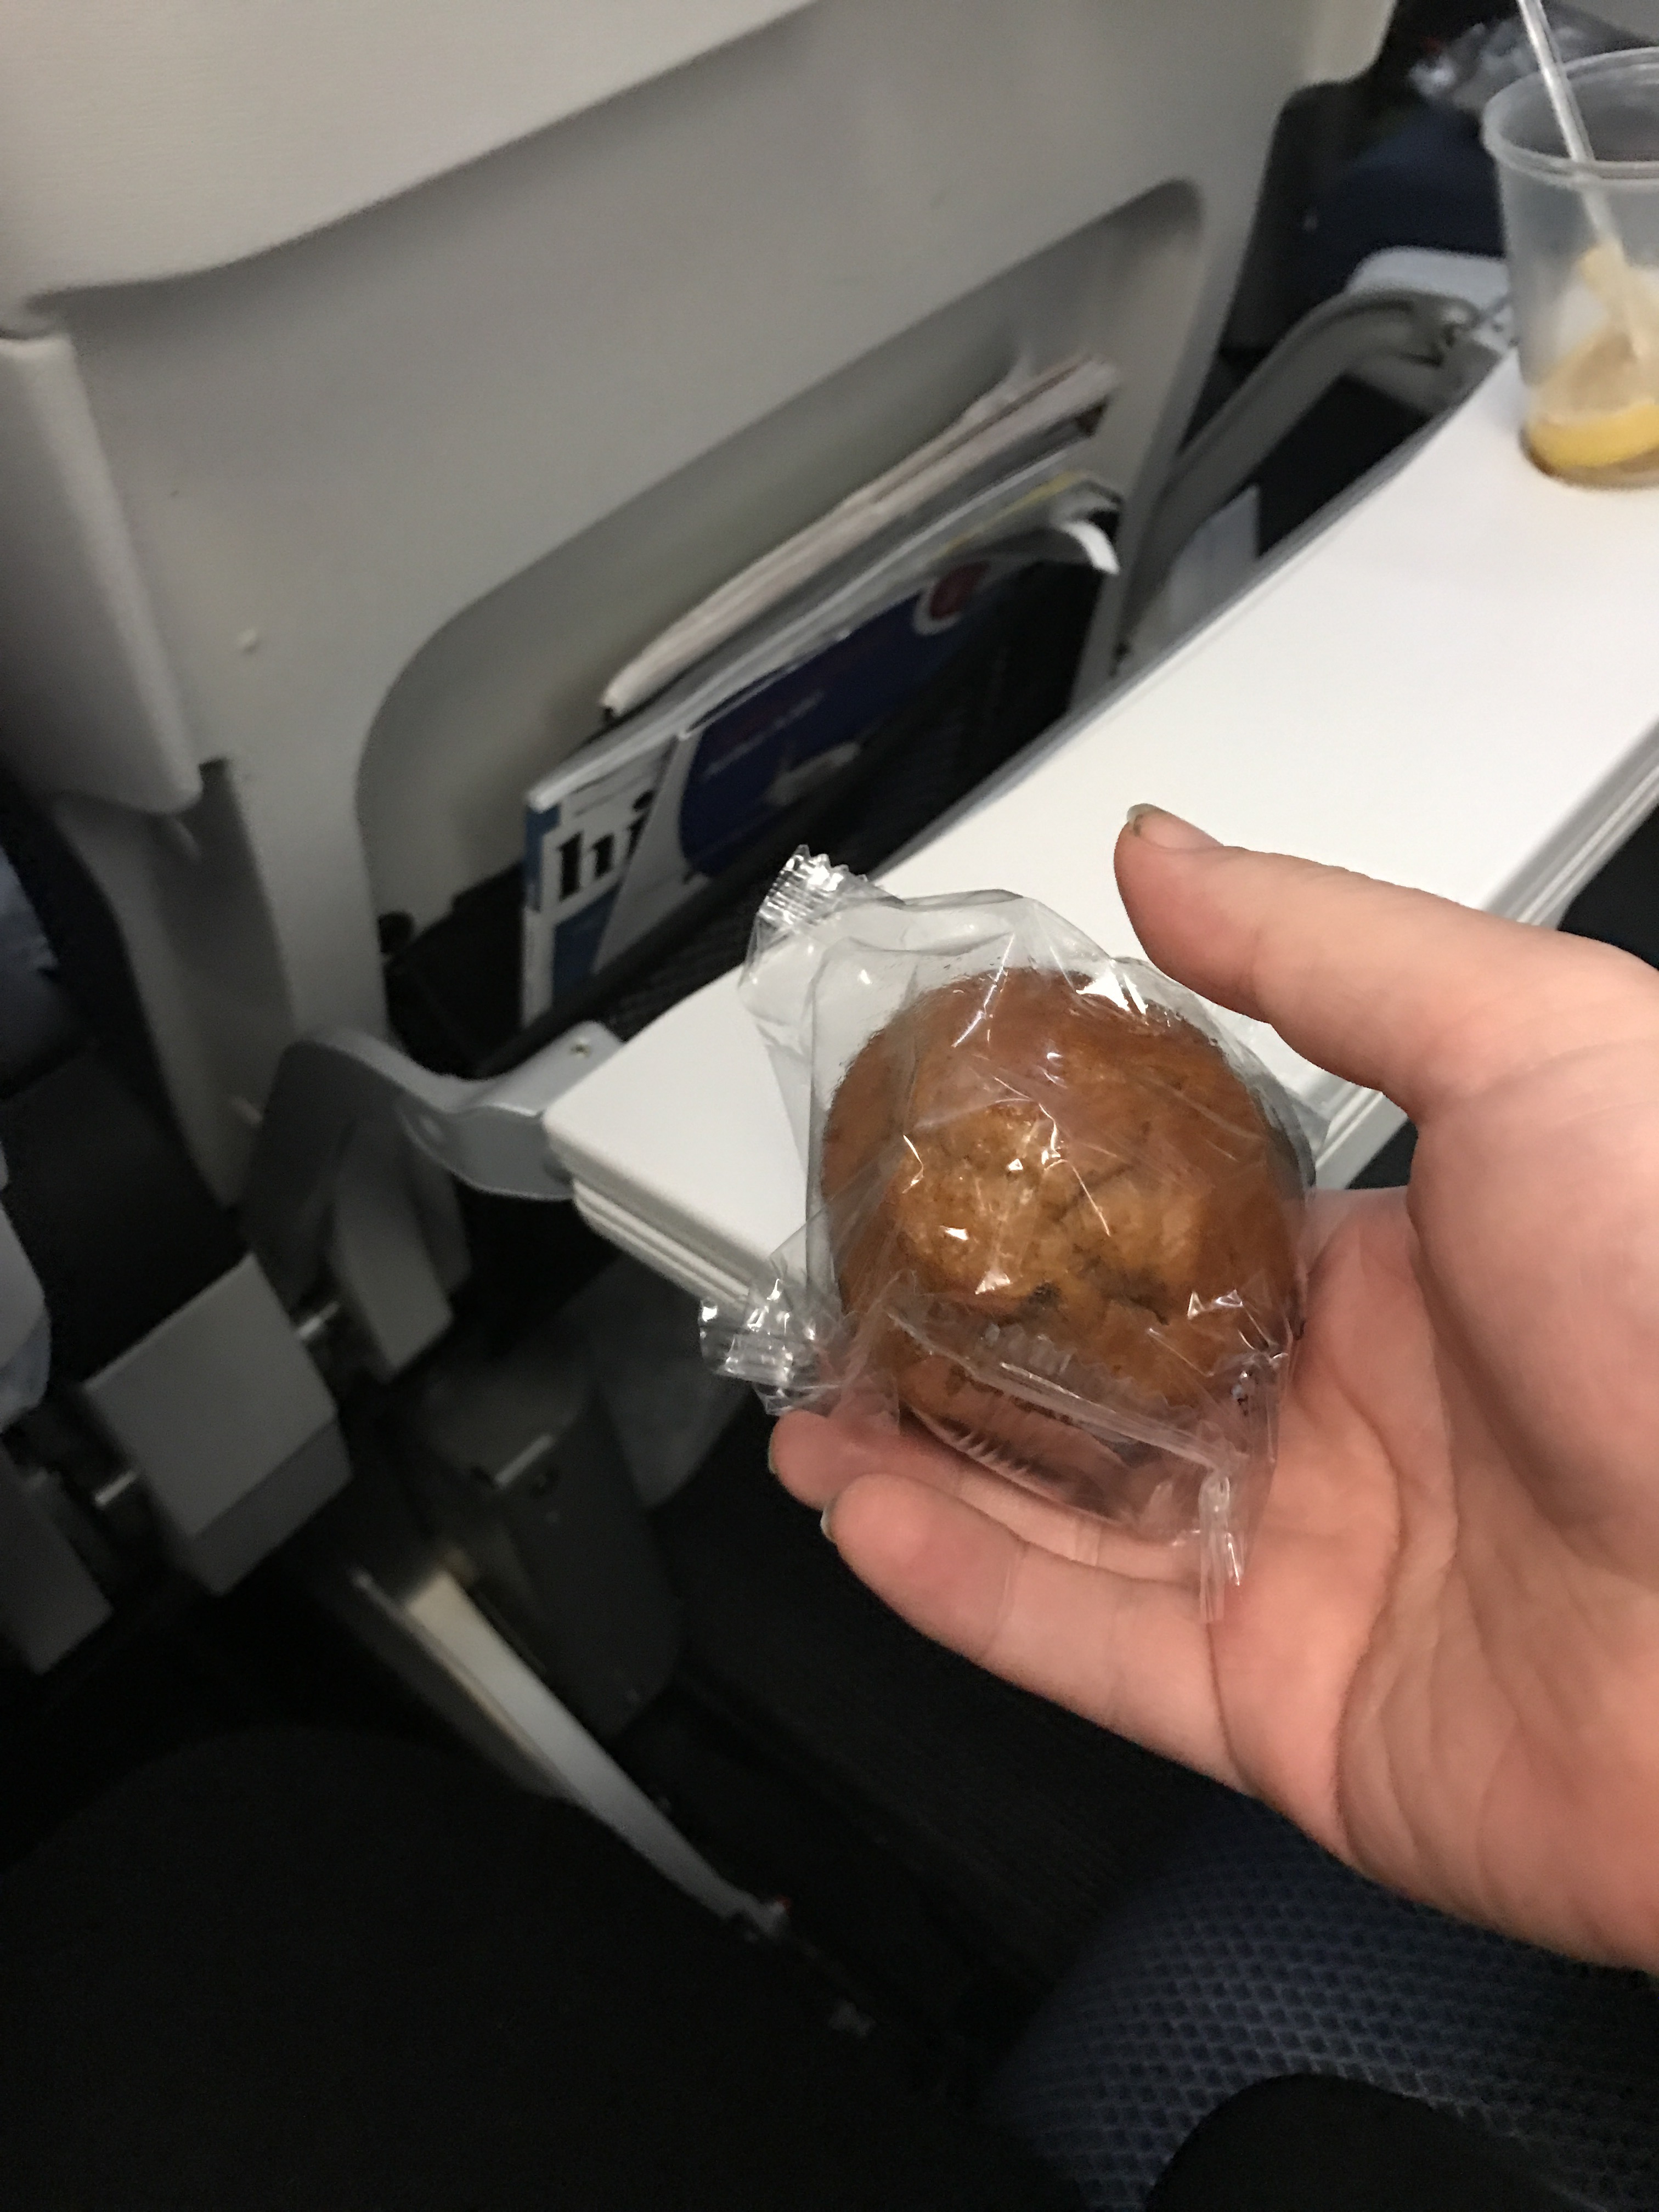 a hand holding a cookie in a plastic wrap